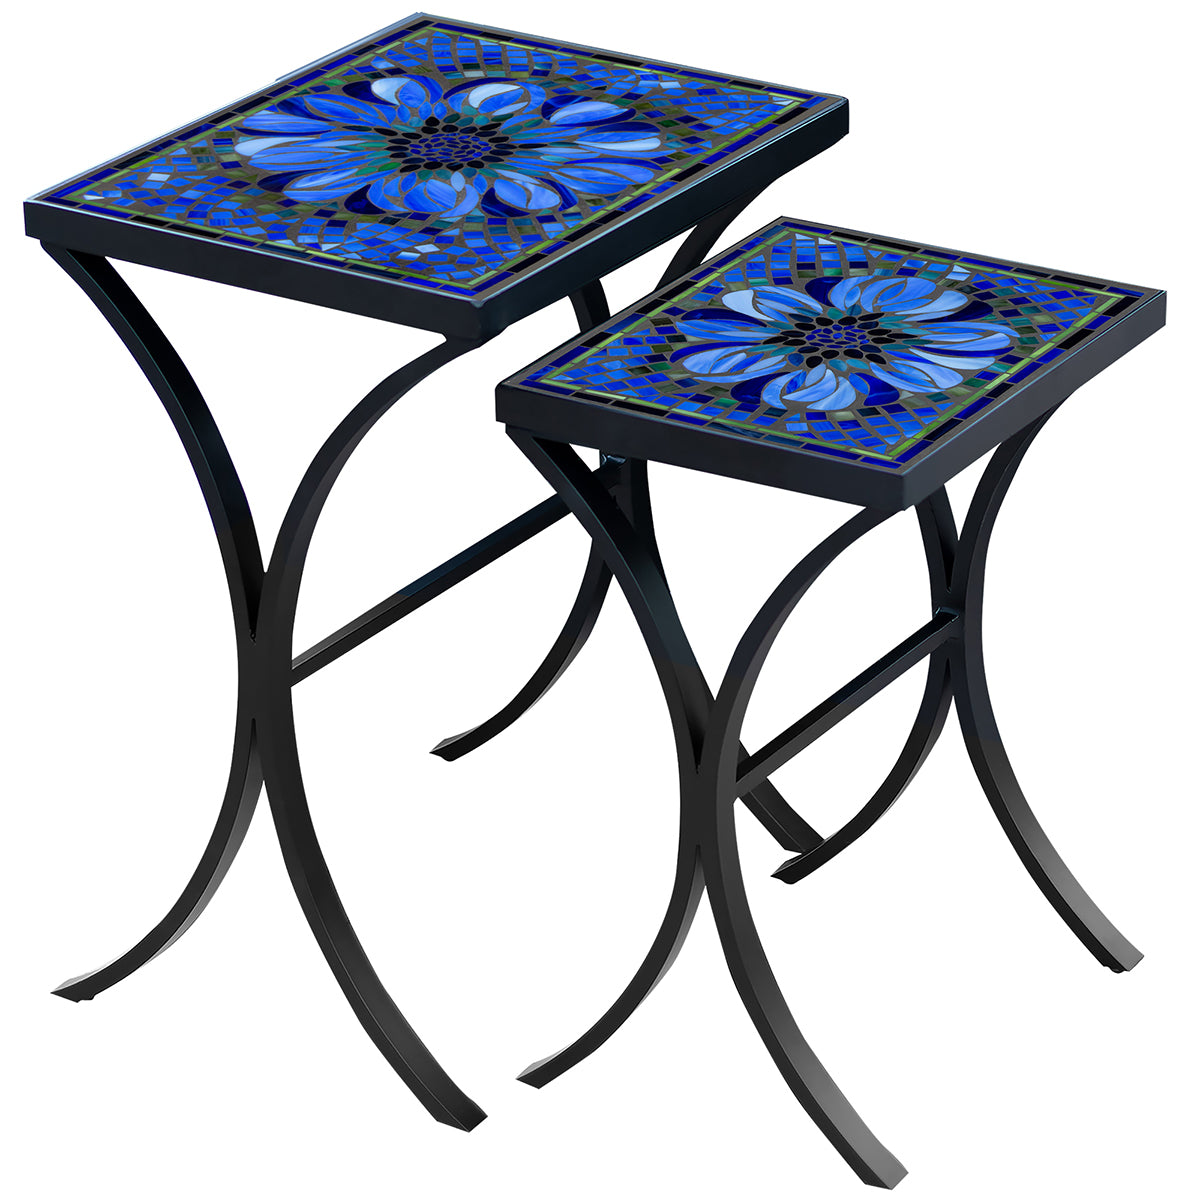 Bella Bloom Mosaic Nesting Tables-Iron Accents